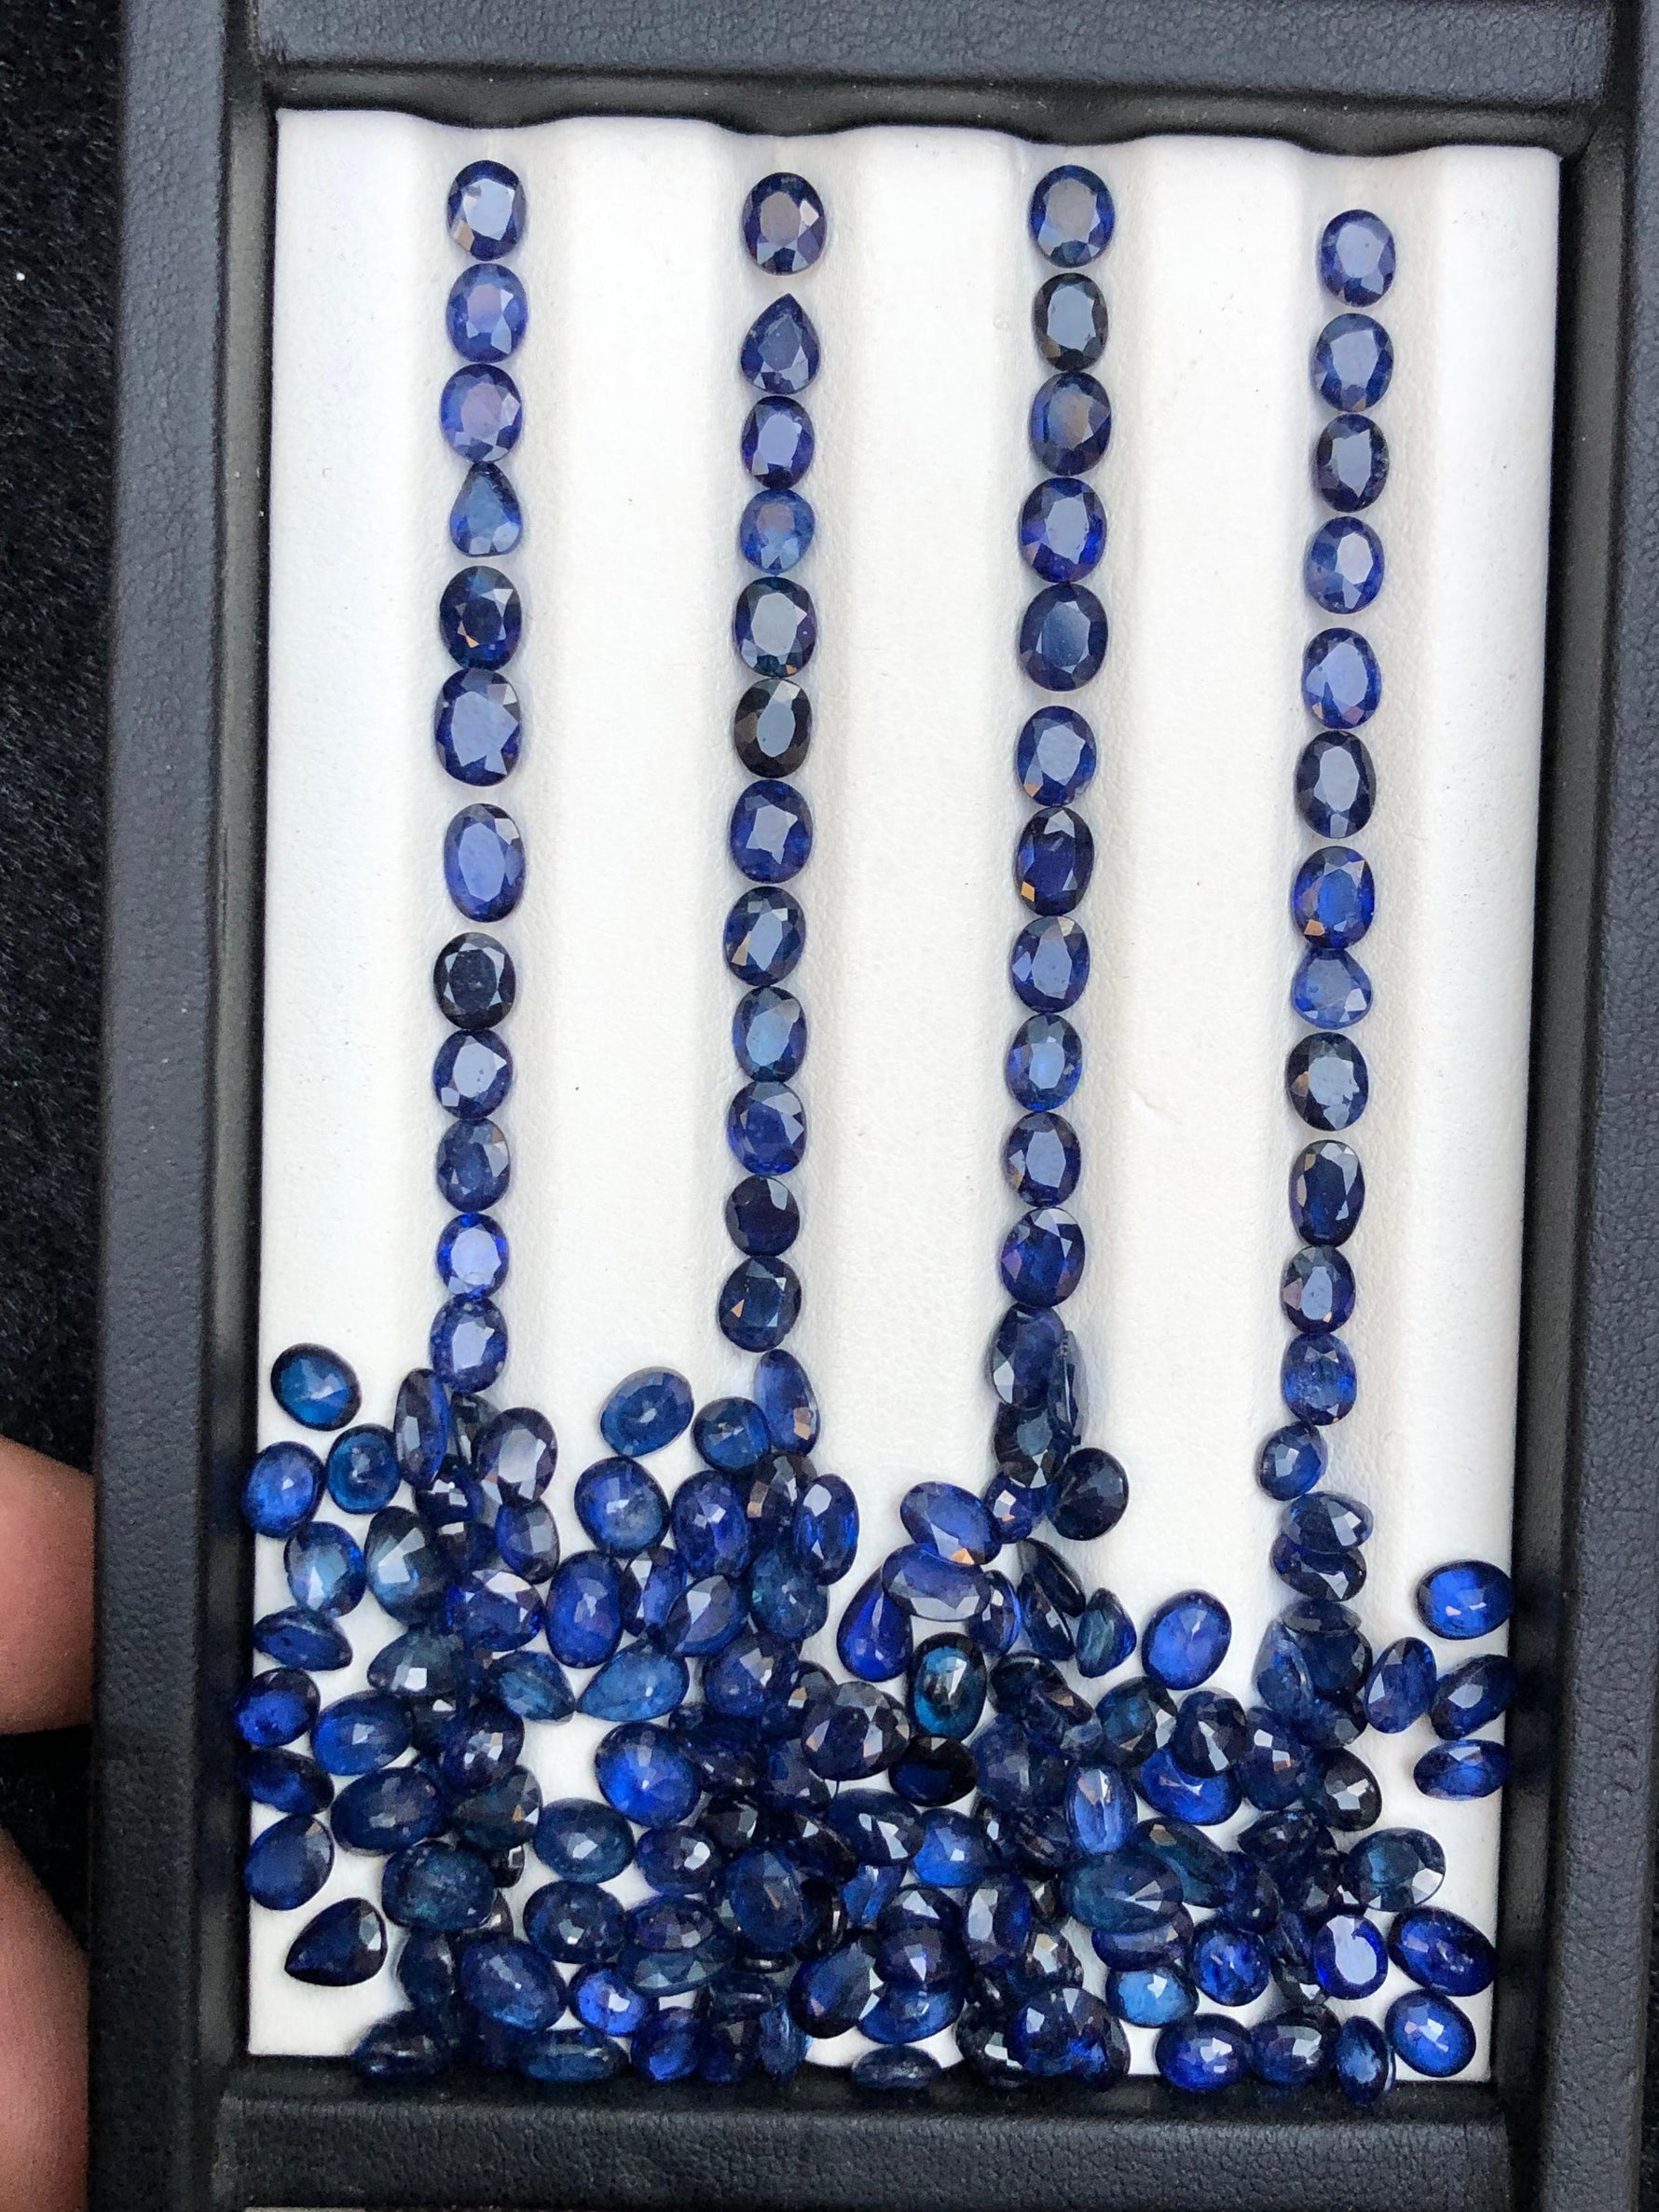 You Also May Like This Sapphire Stones.